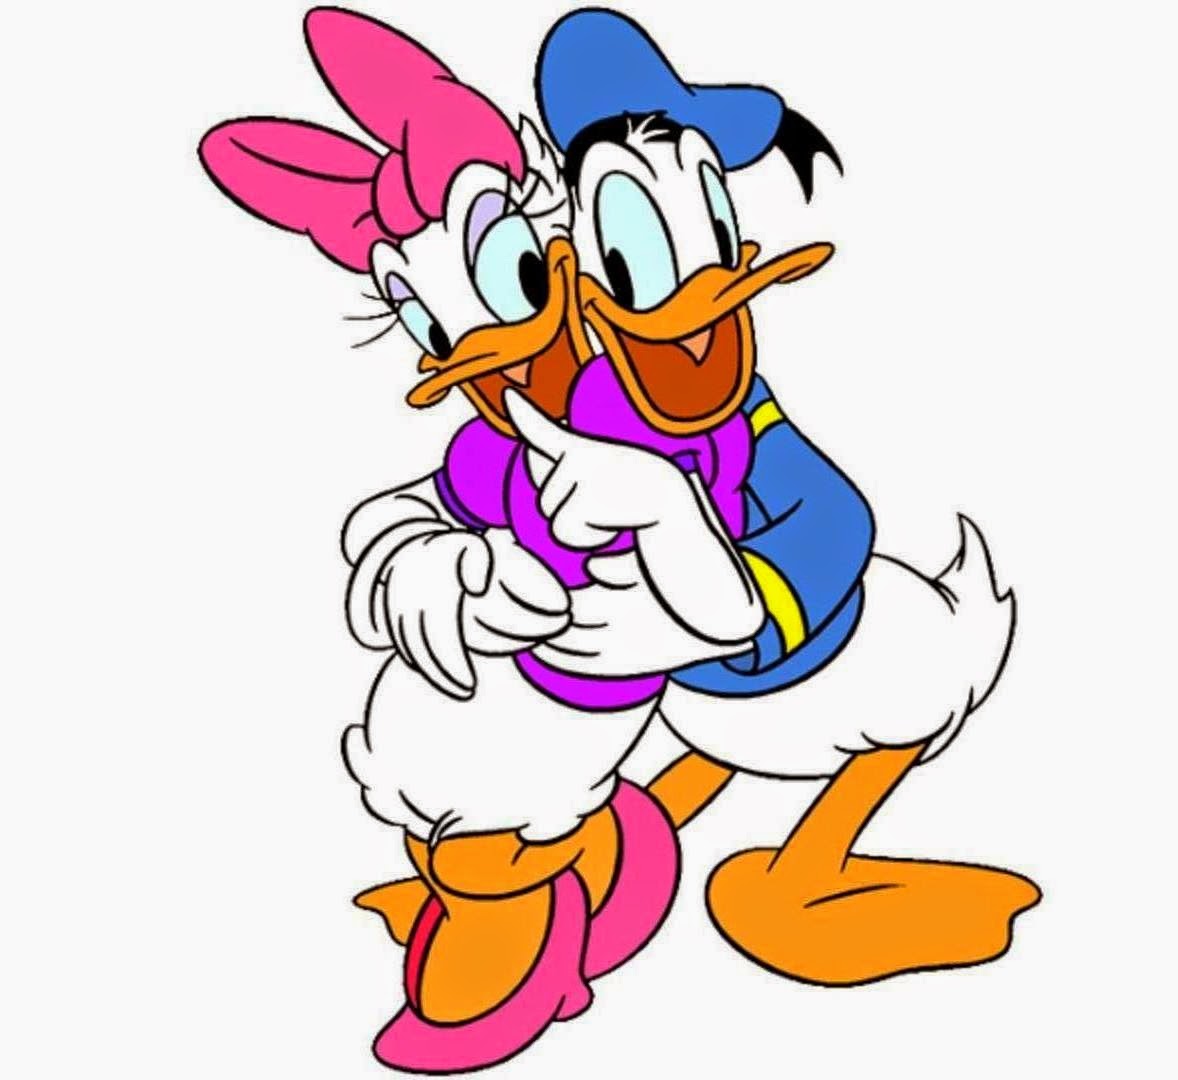 Donald duck Wallpapers Download  MobCup